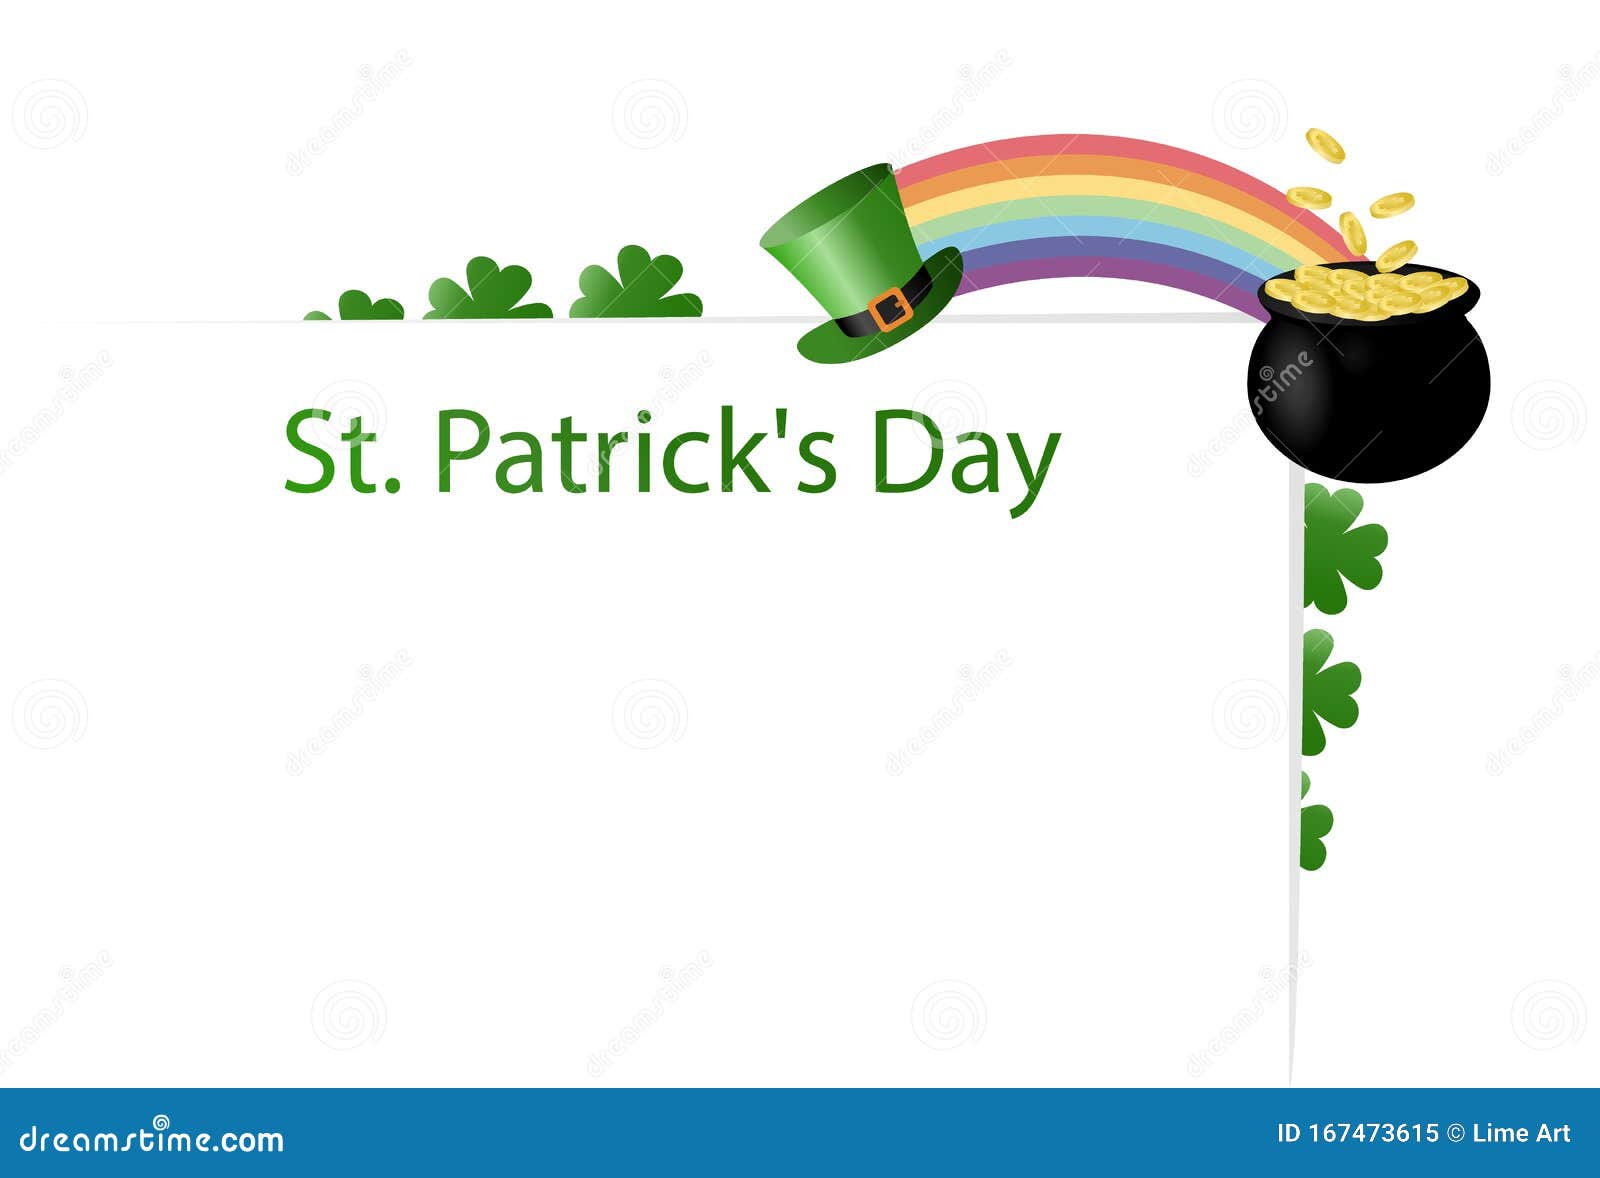 poster for the holiday of st. patrick`s day on march 17 with a place for text. leprechaun hat, rainbow, pot of gold coins with cl